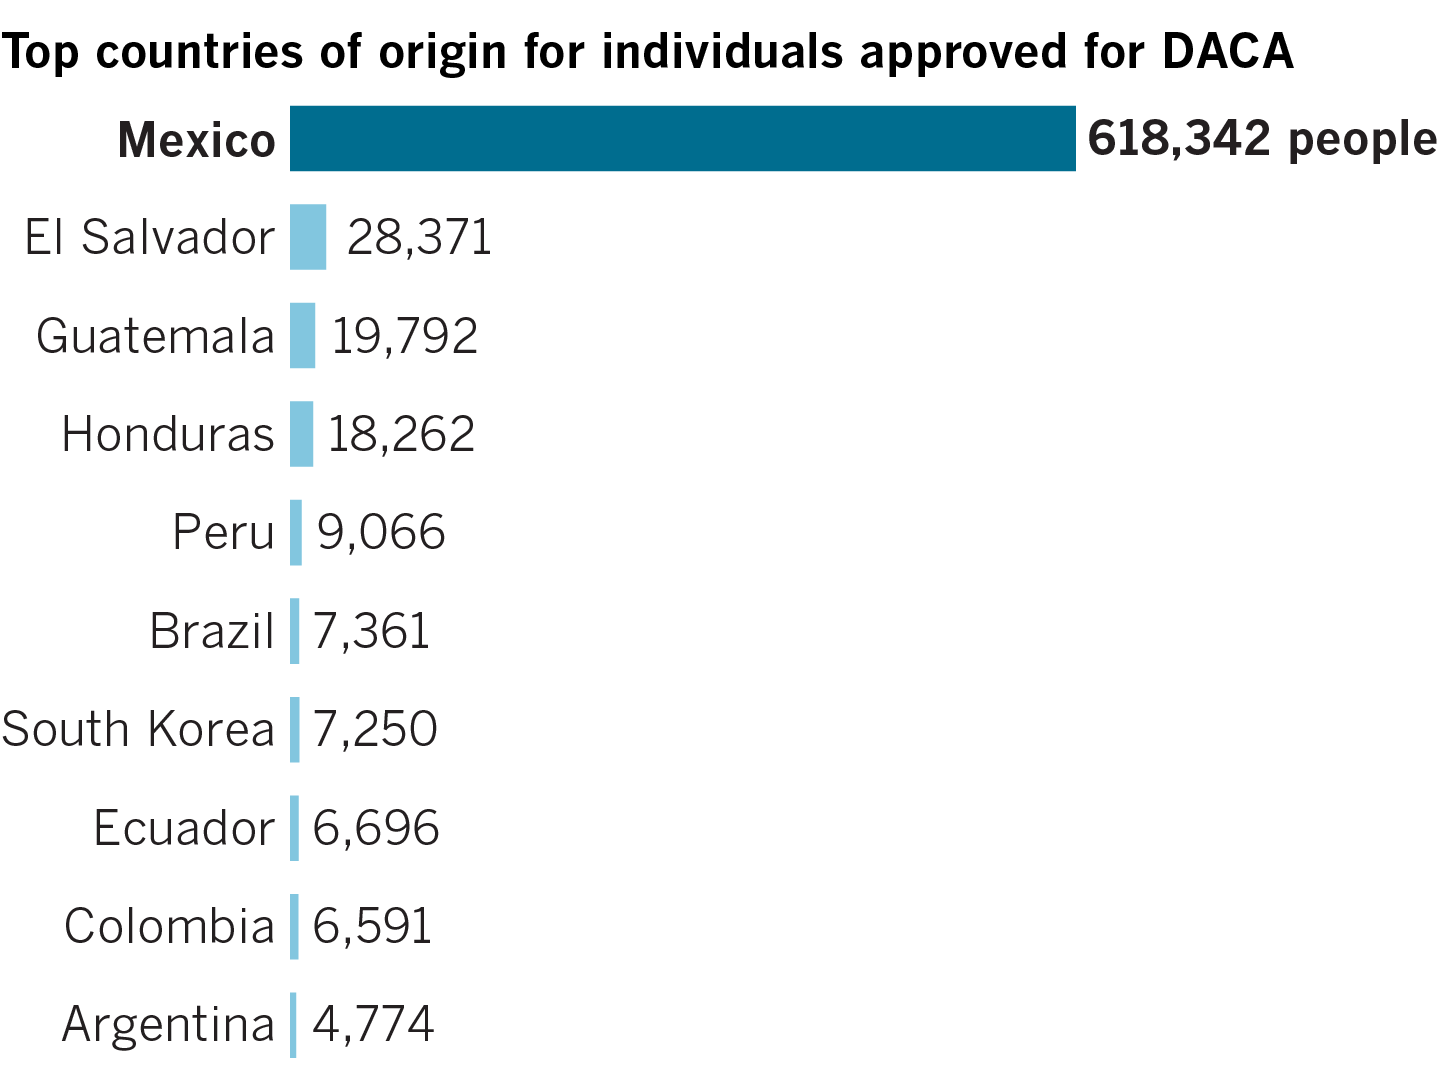 What’s next for DACA and the nearly 800,000 people protected by it